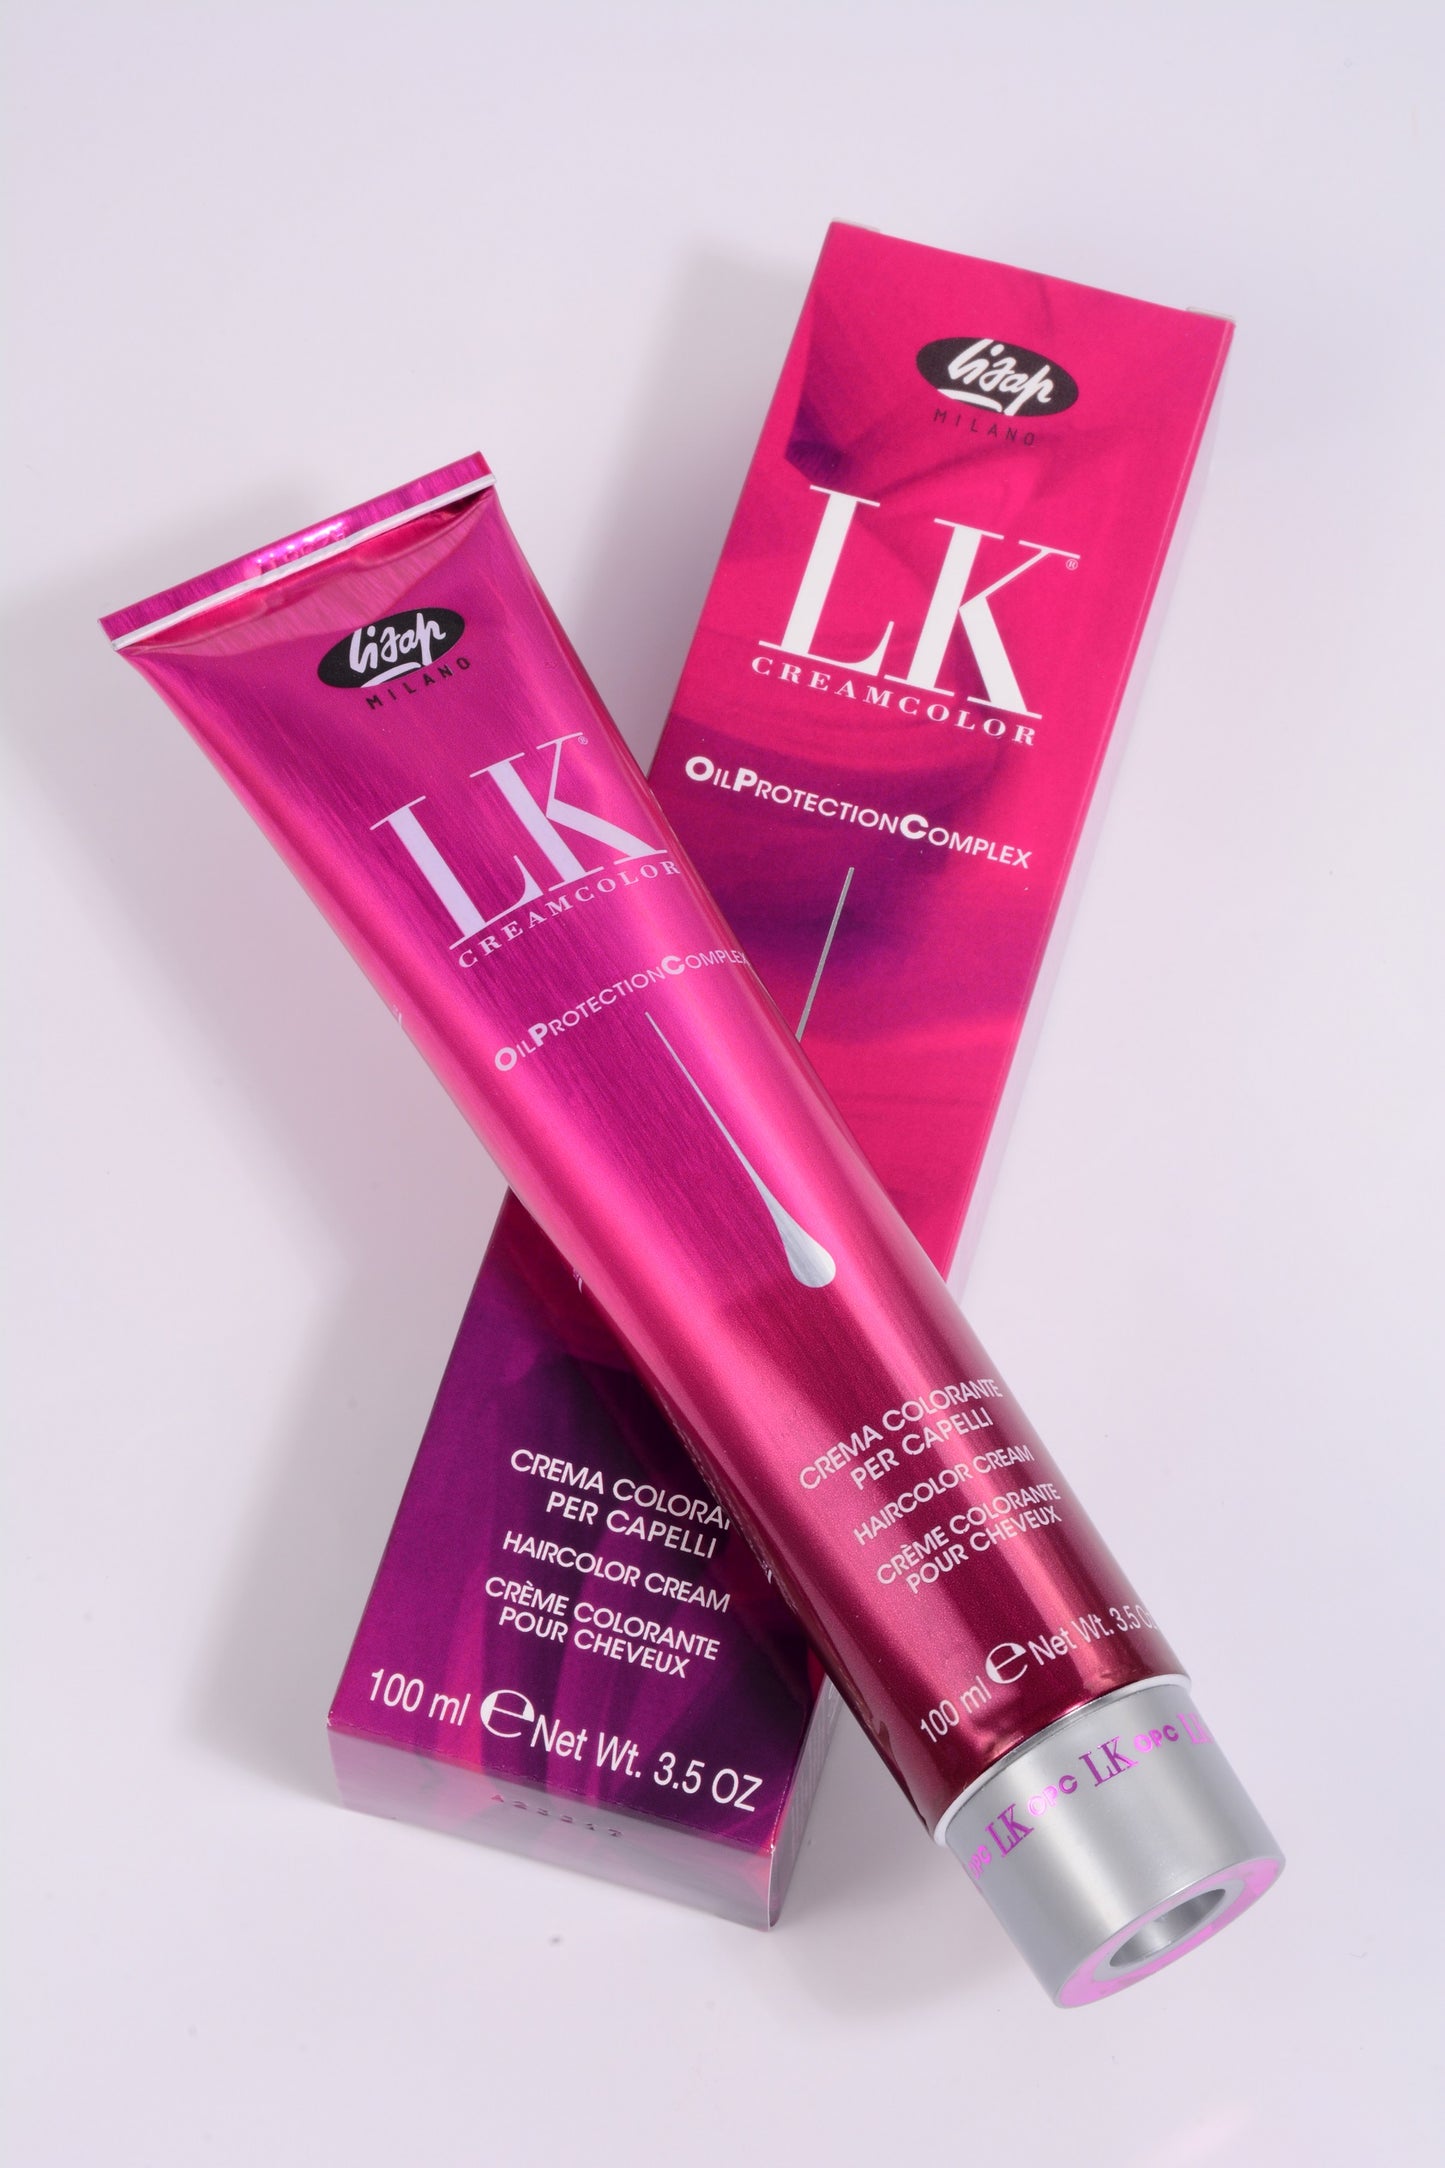 LK Creamcolor 6/07 Oil Protection Complex